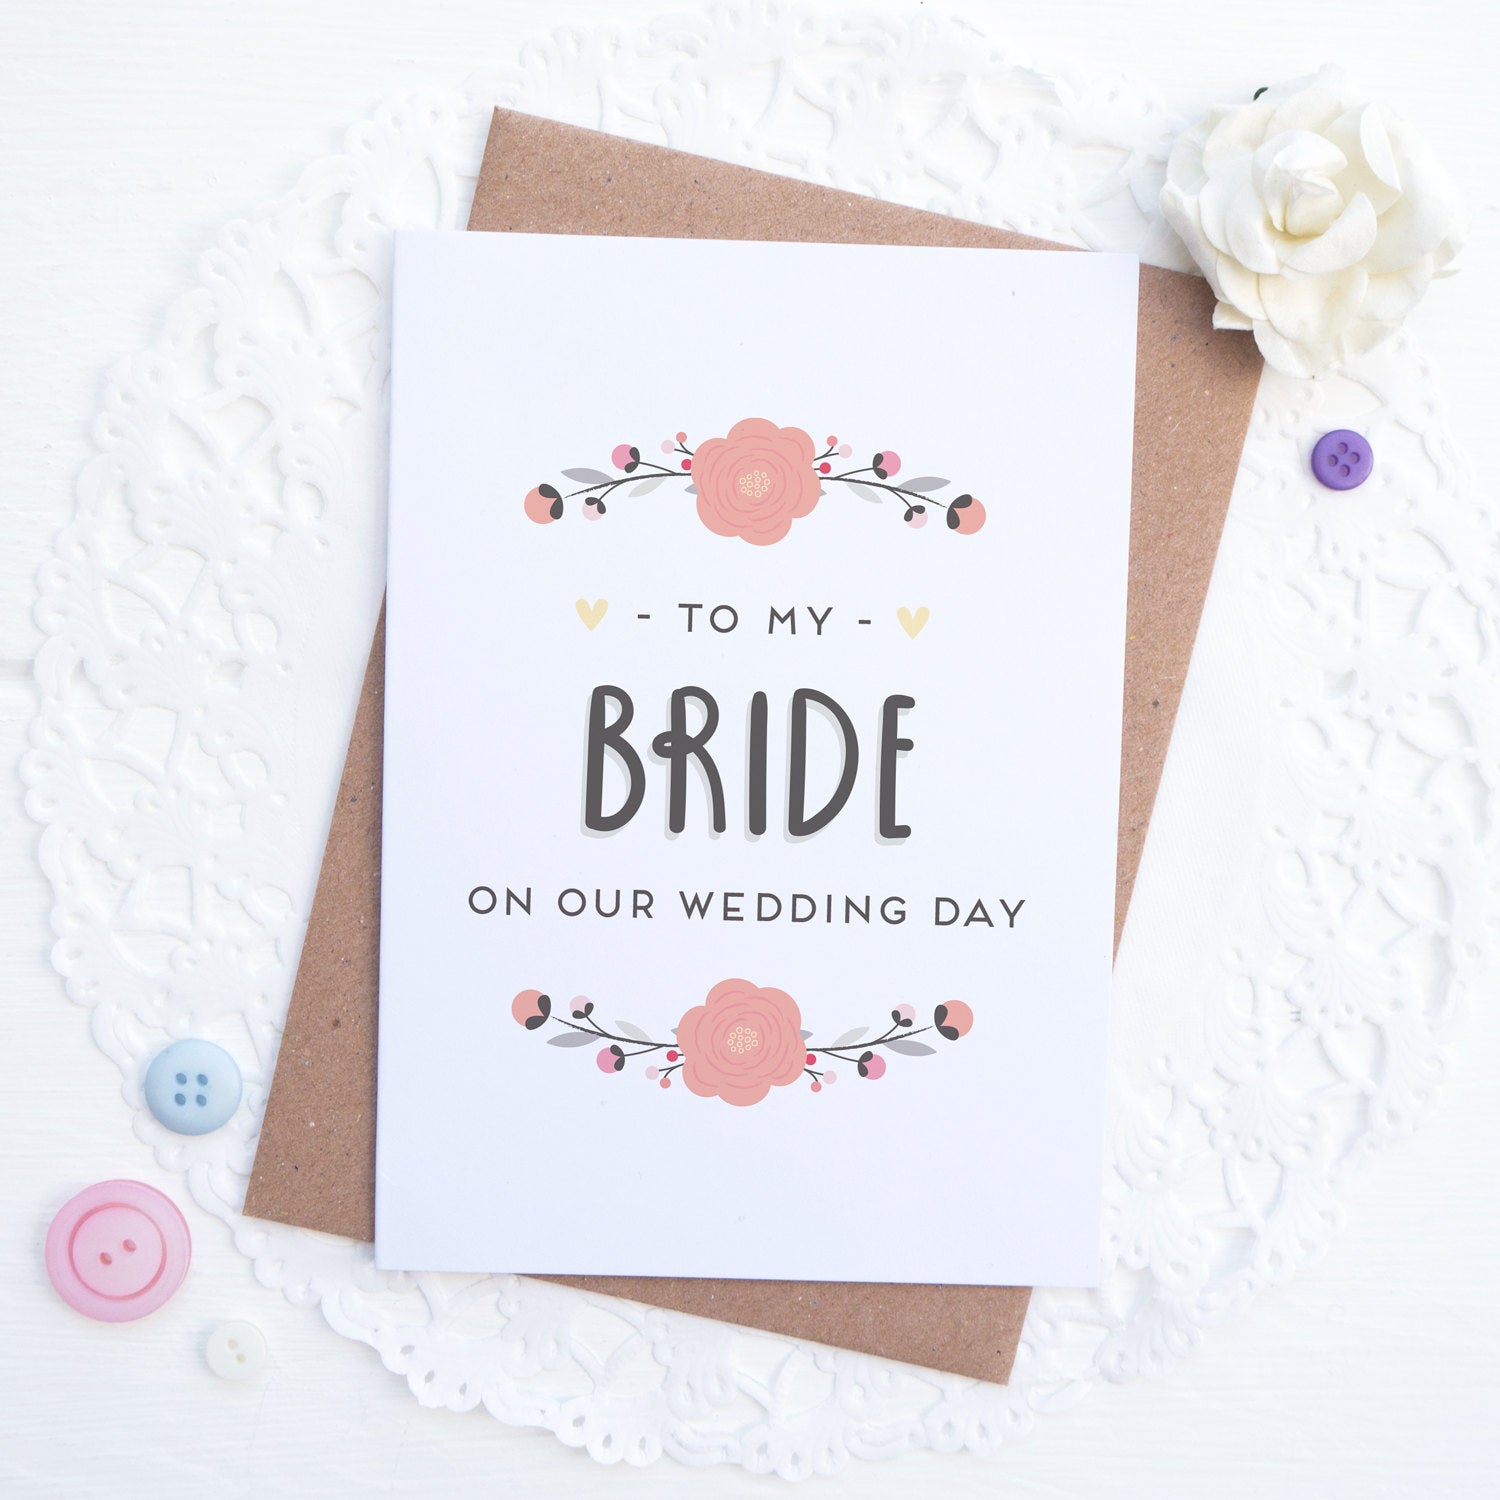 To my bride on our wedding day card in pink